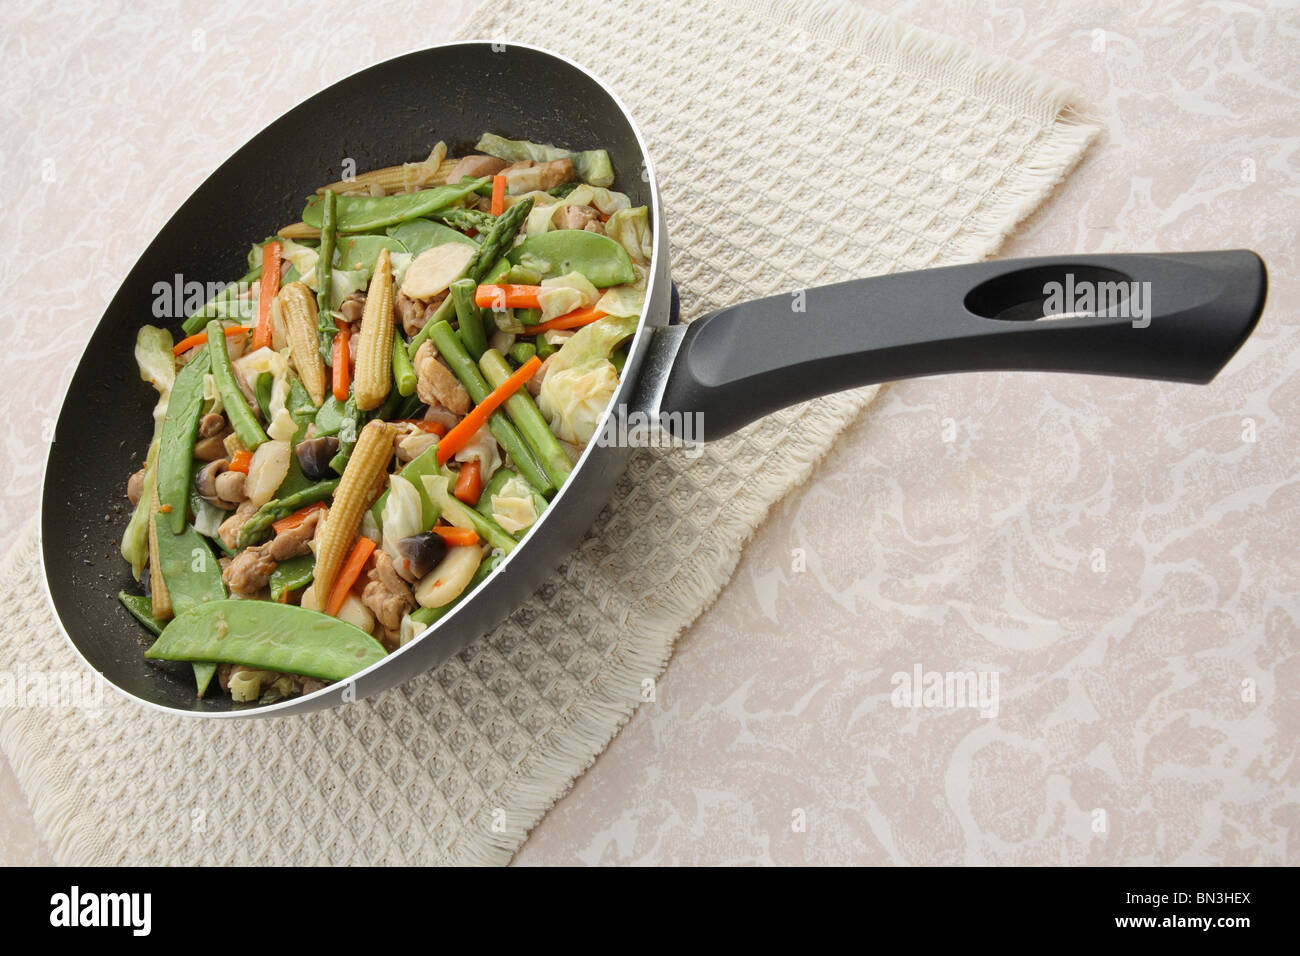 Chinese vegetable stir fry in wok on a table Stock Photo